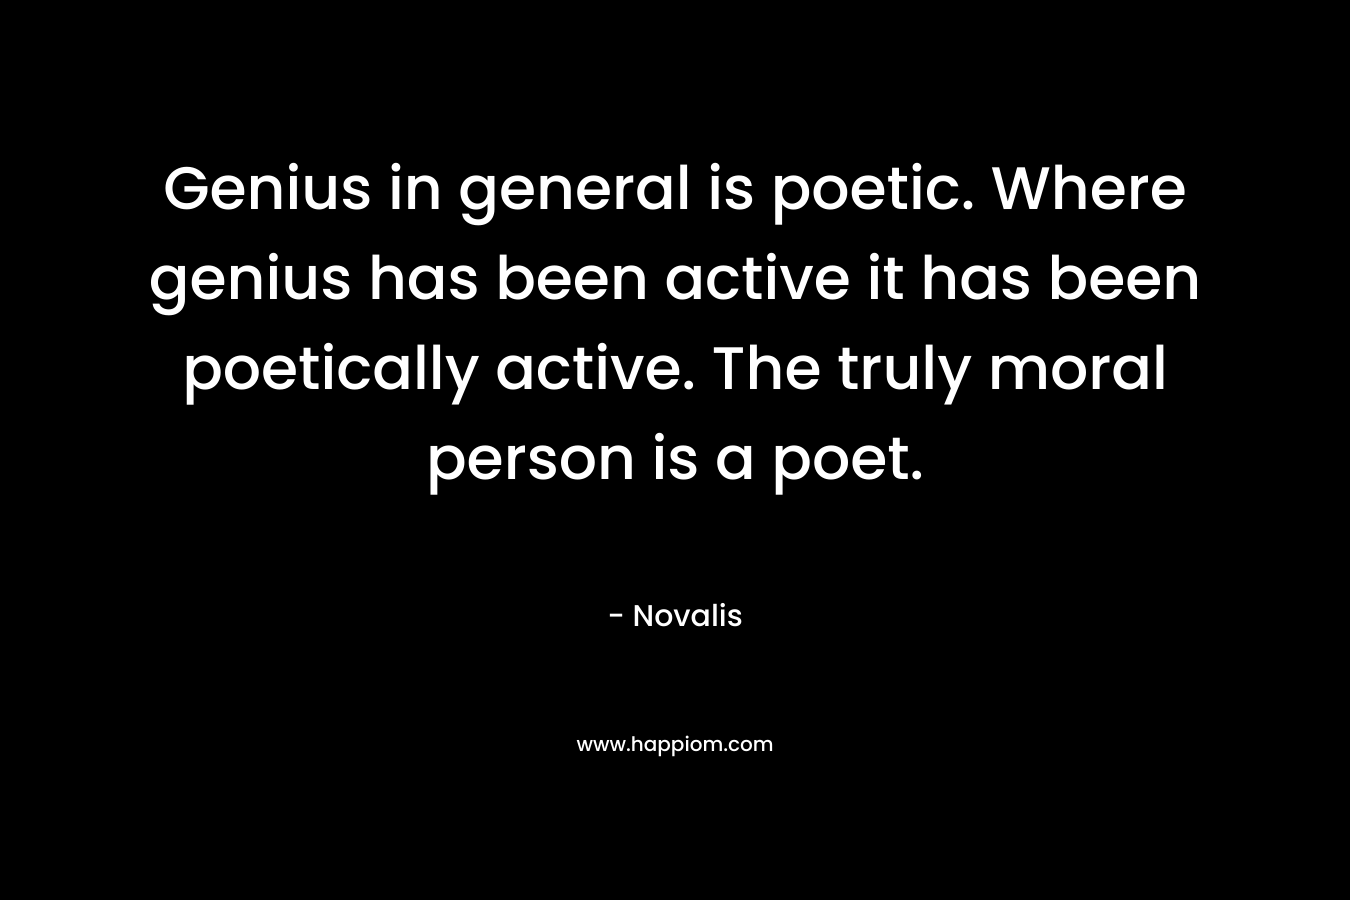 Genius in general is poetic. Where genius has been active it has been poetically active. The truly moral person is a poet.